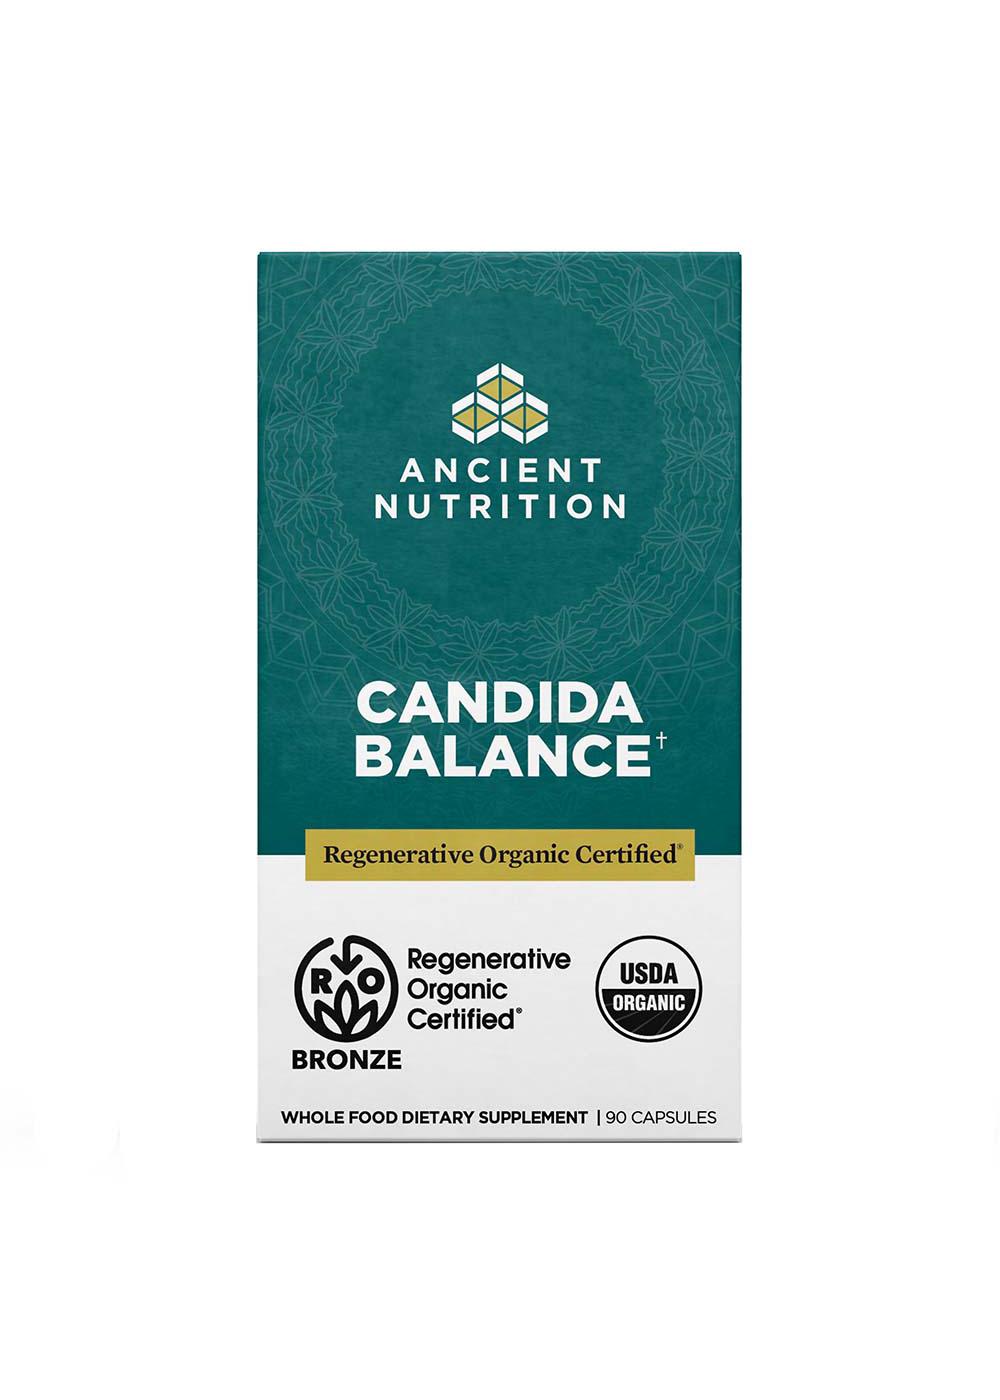 Ancient Nutrition Candida Balance Capsules; image 1 of 5